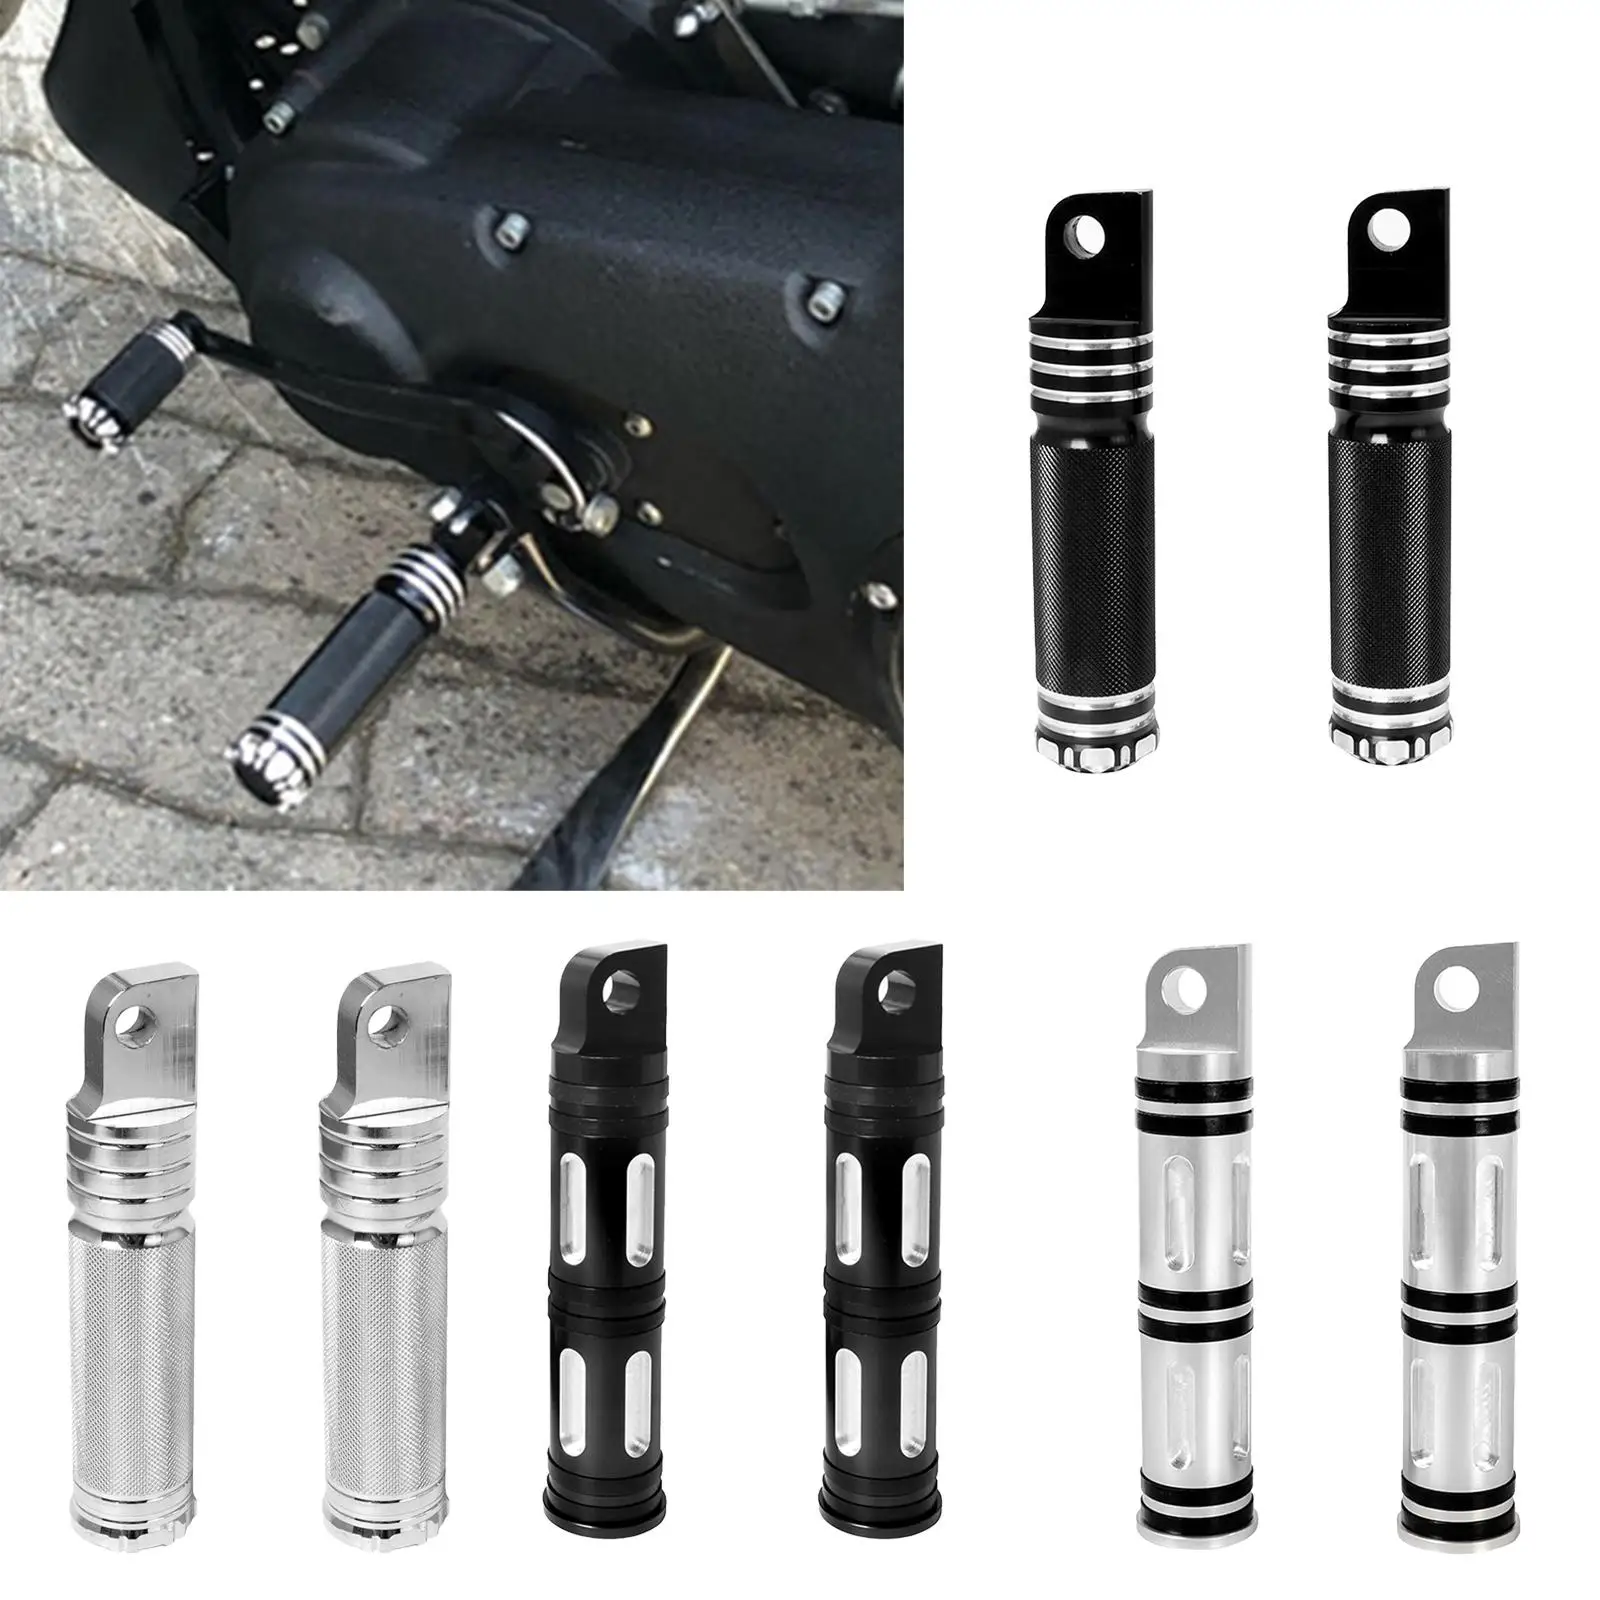 2Pcs Motorcycle Rear Foot Pegs Rest Pedals for  Street